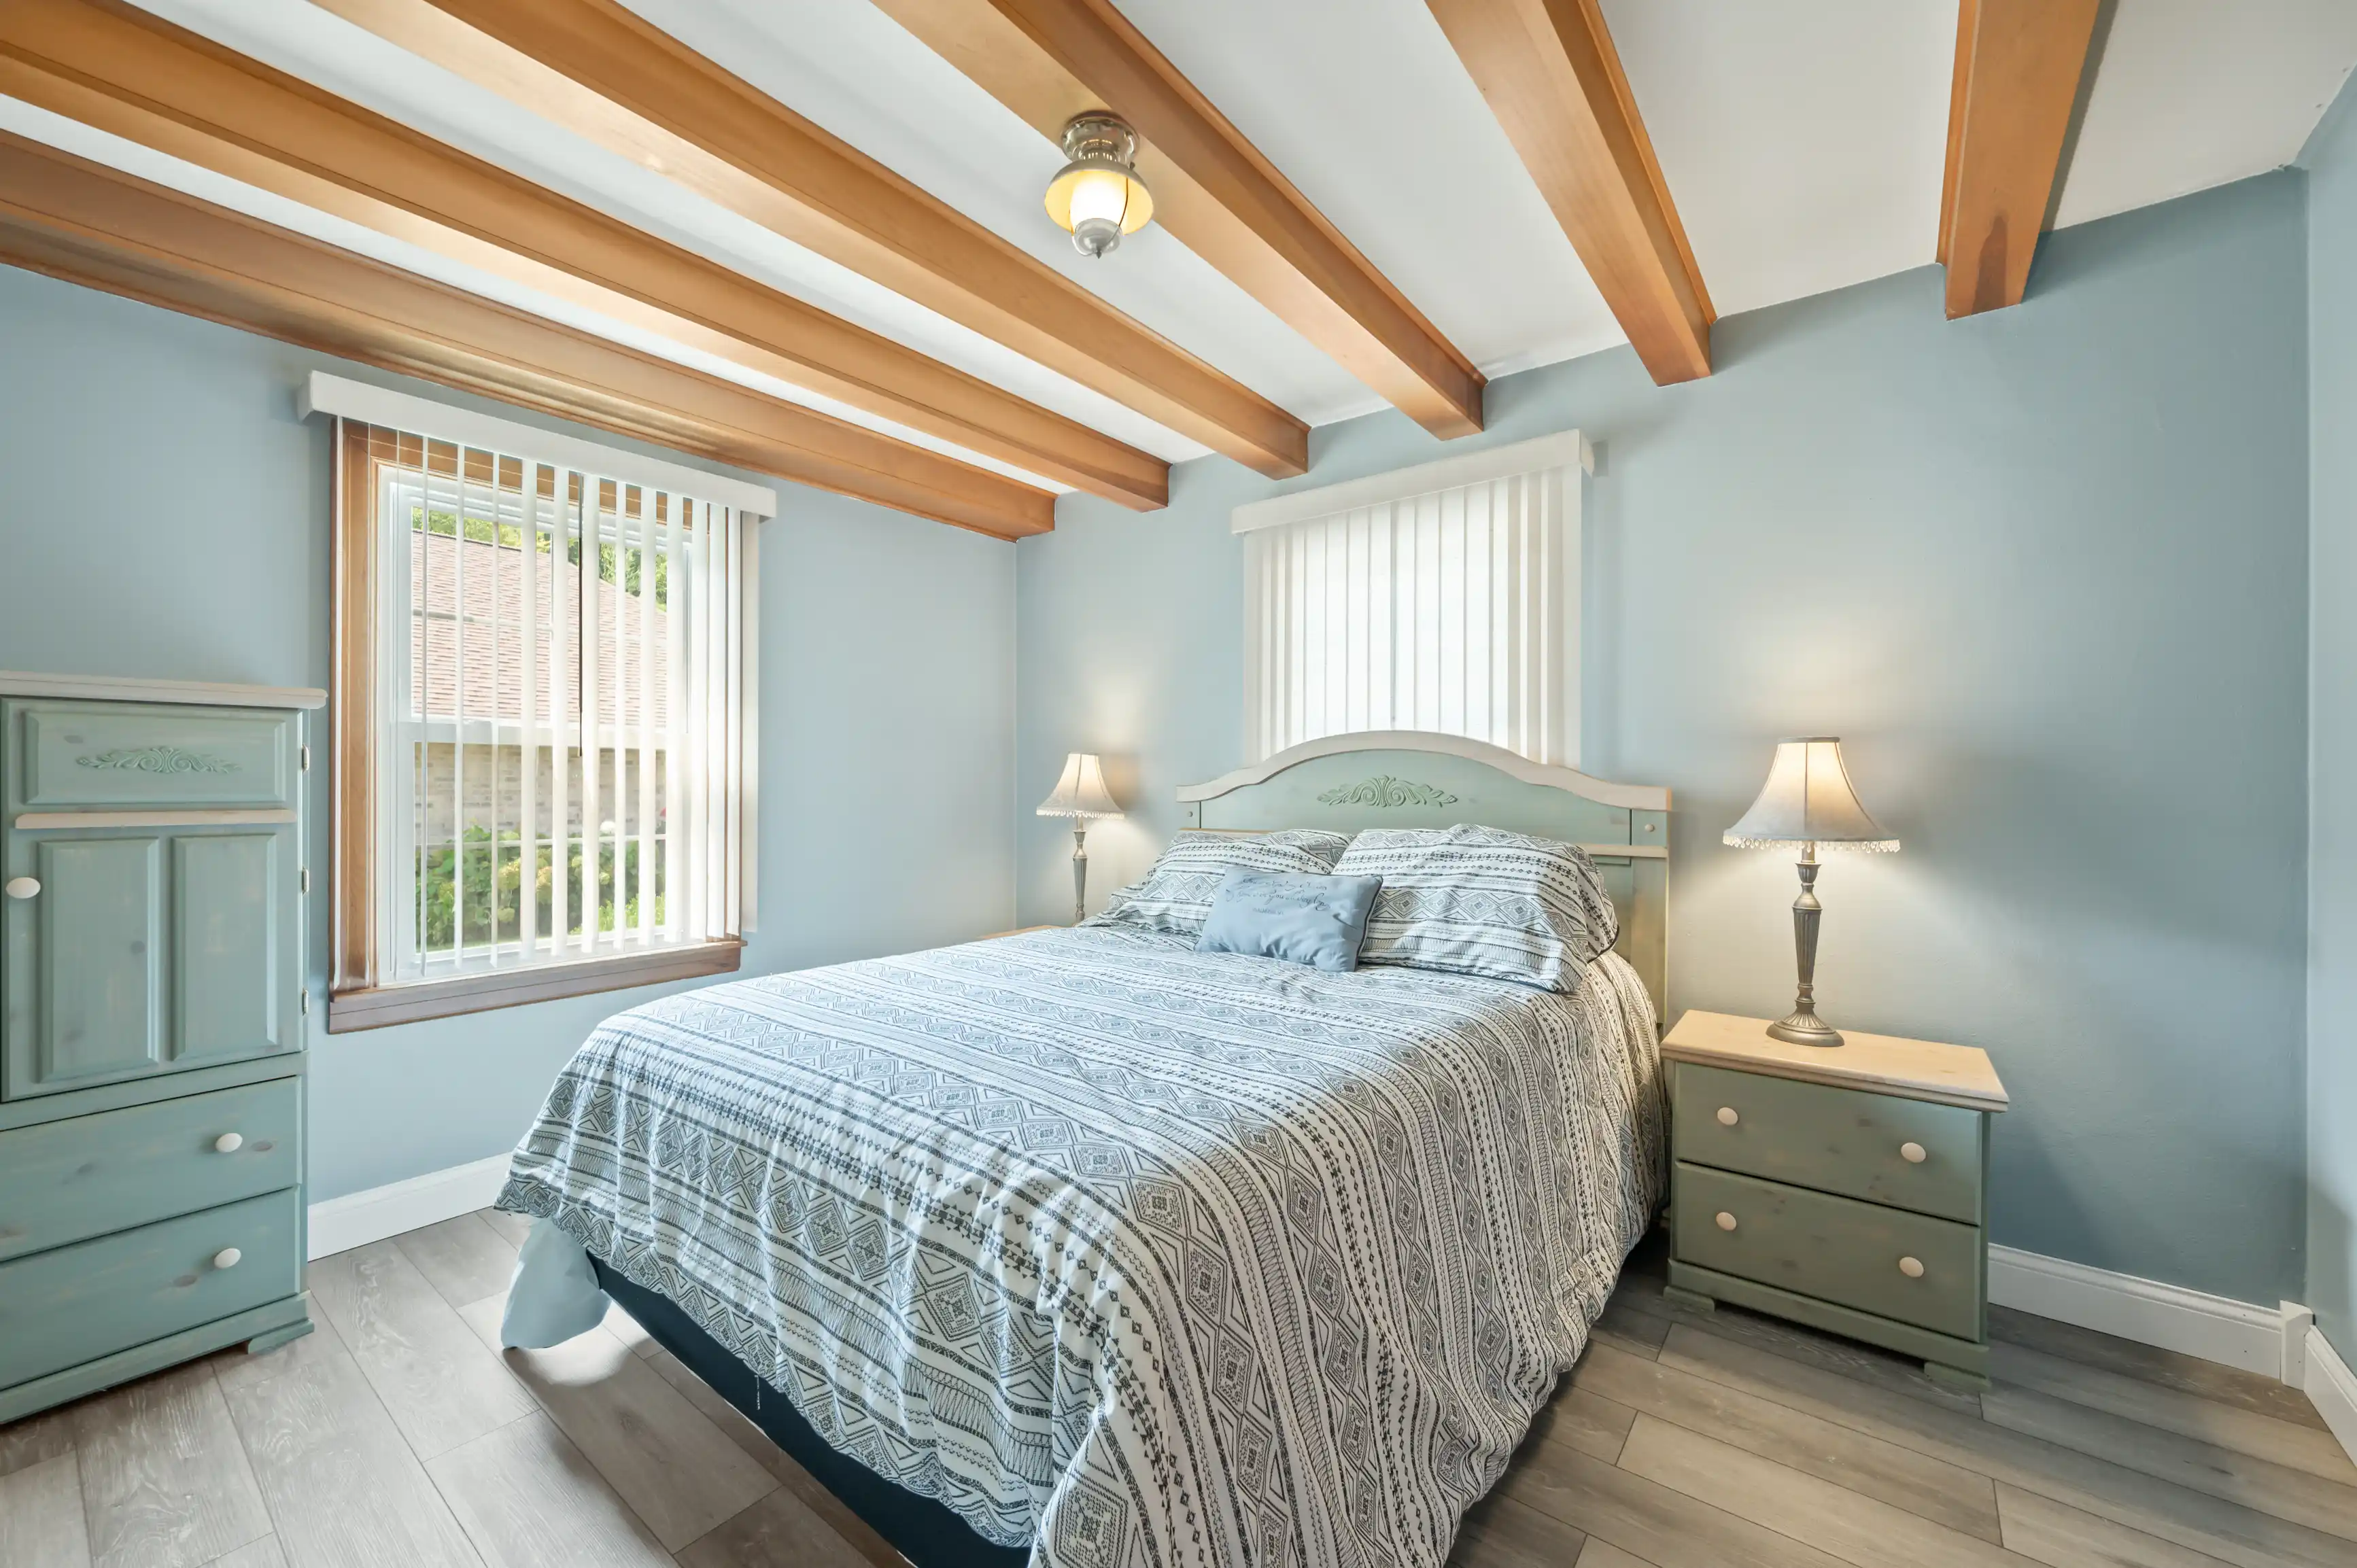 A cozy bedroom featuring a queen-sized bed with patterned bedding, matching pale green wooden furniture, light blue walls with white trims, exposed wooden beams, and a large window with vertical blinds.